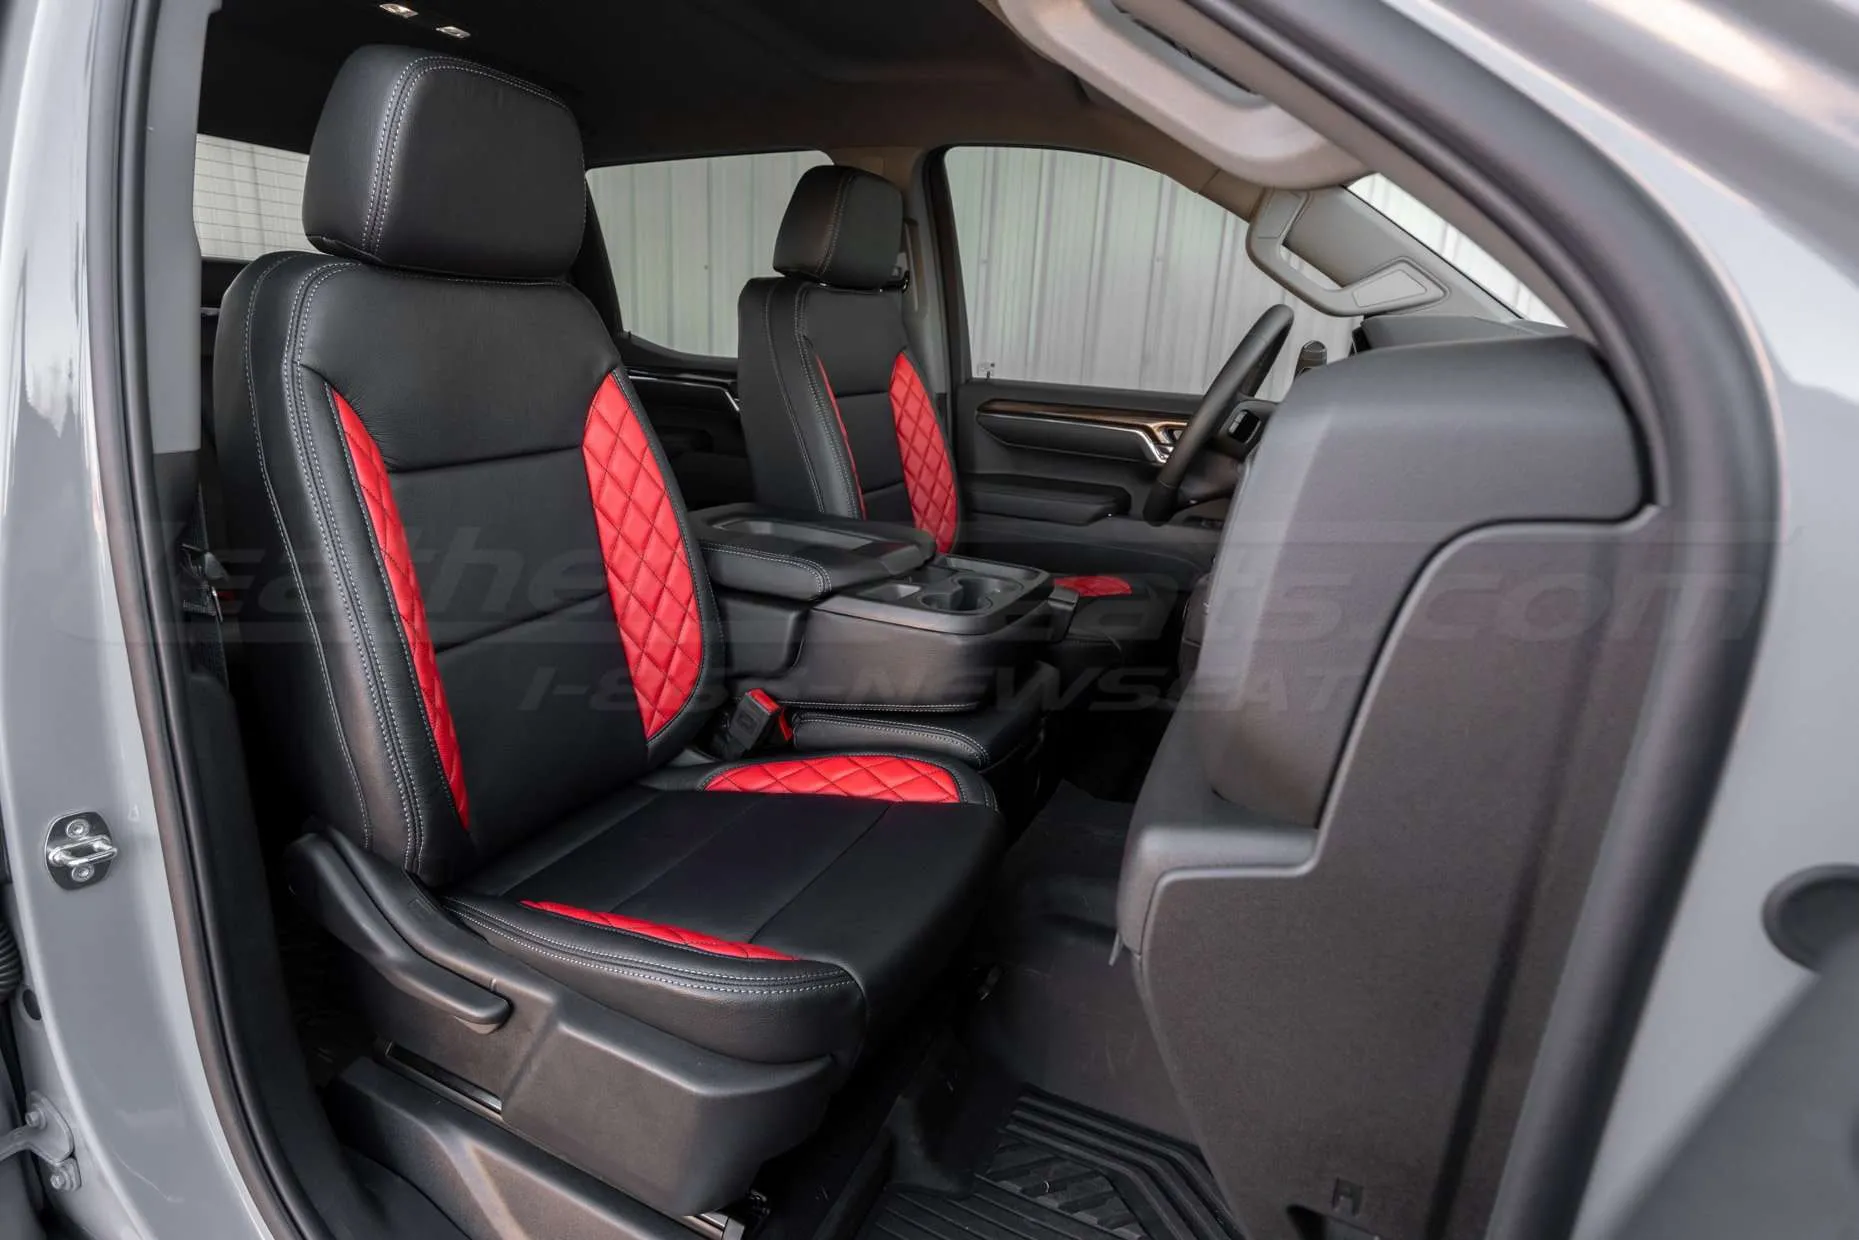 Chevrolet Silverado front passenger seat with custom two-tone leather seats